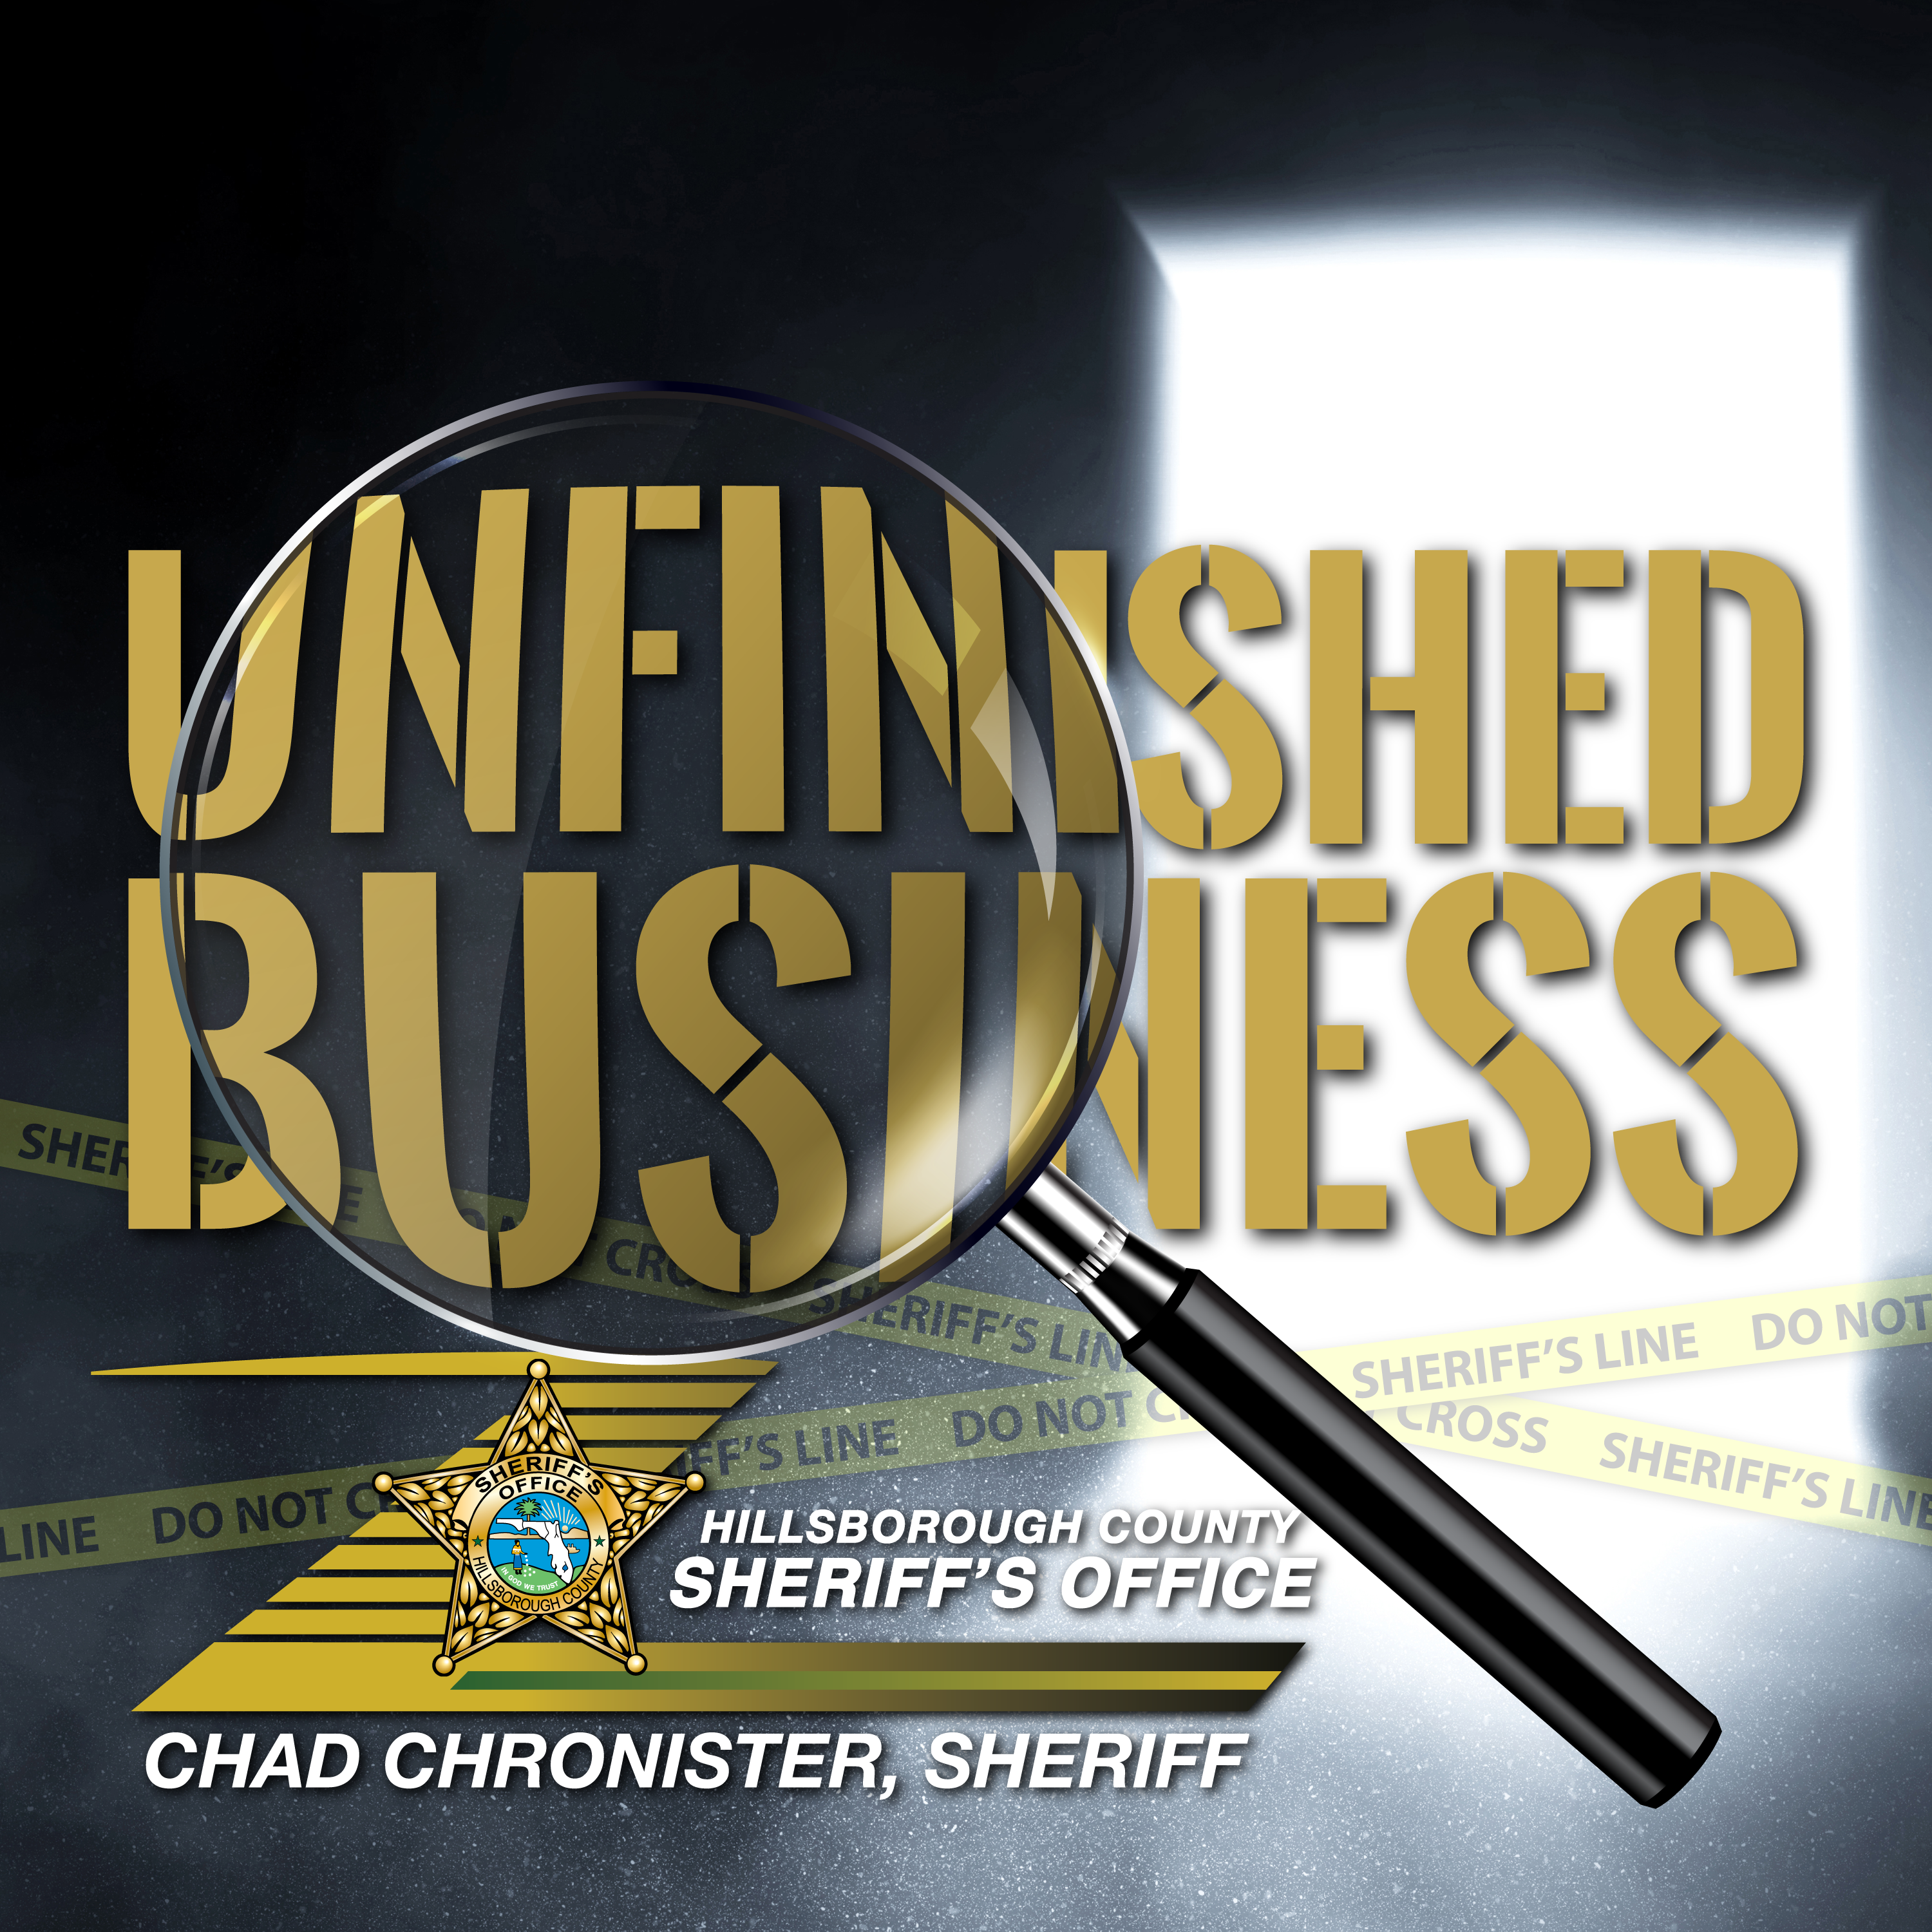 Listen to complete first season of HSCO's cold case podcast, "Unfinished Business"